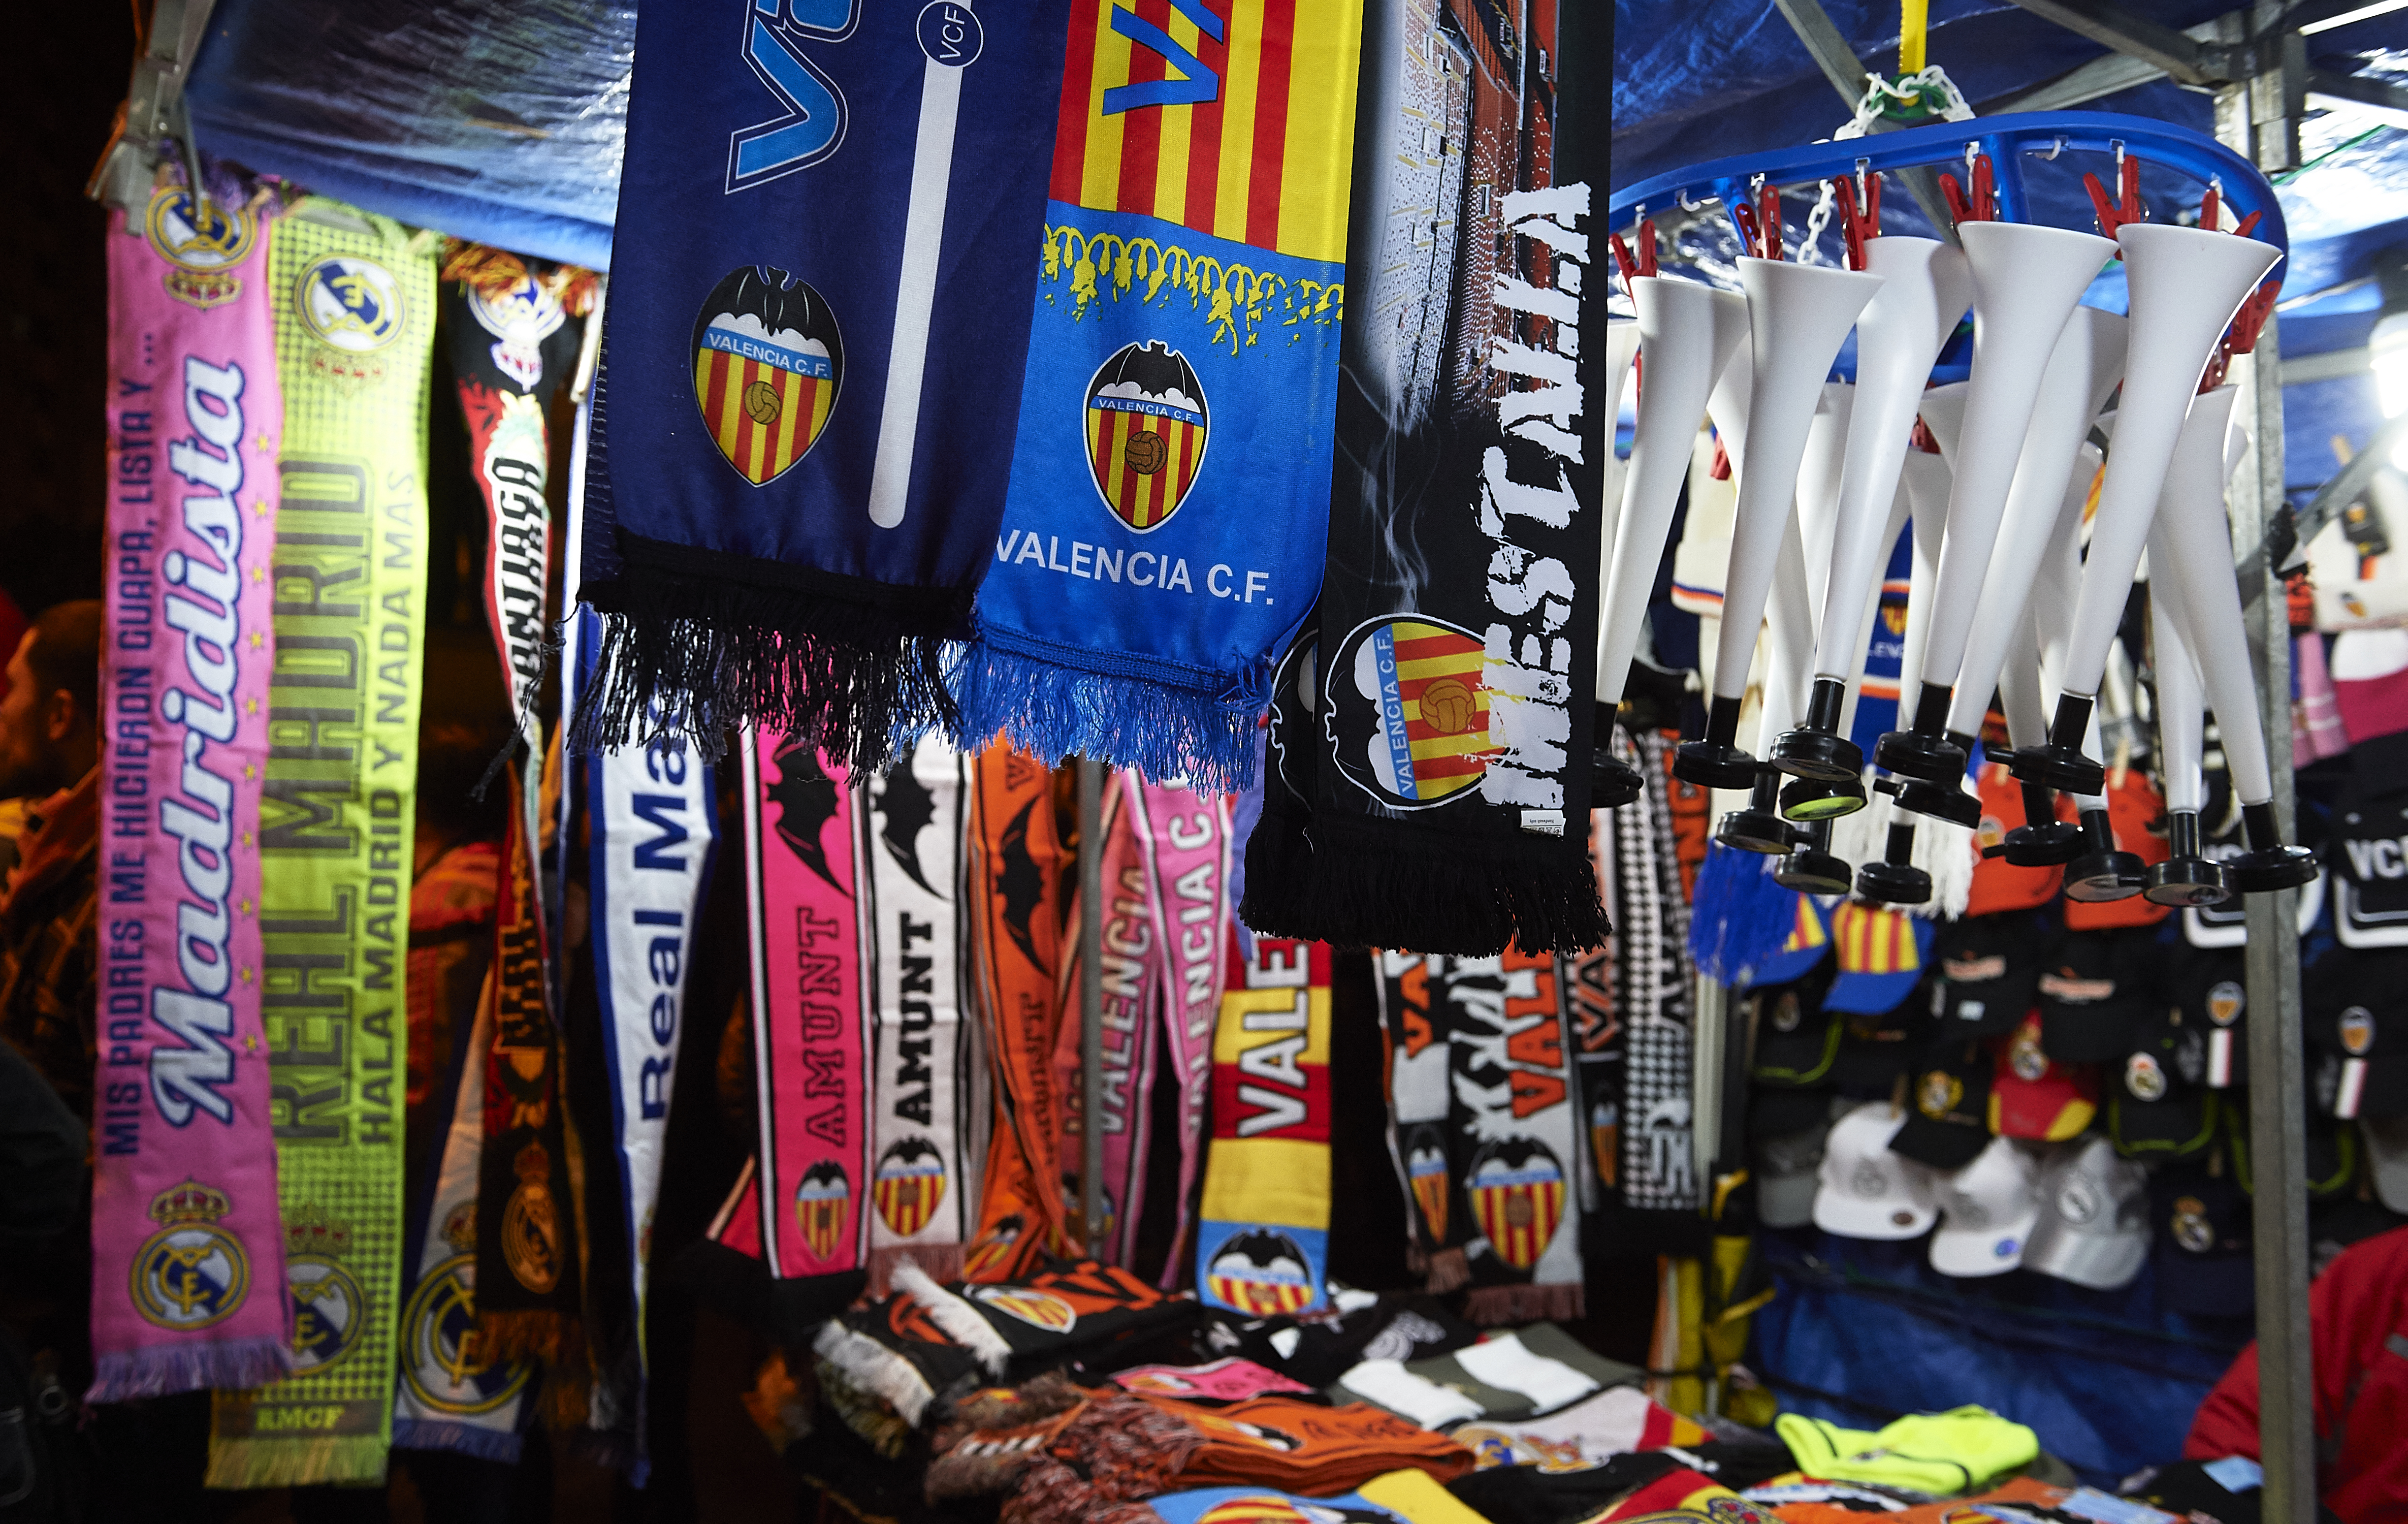 VALENCIA, SPAIN - JANUARY 03:  Scarves are seen on sale outside Estadi de Mestalla prior the La Liga match between Valencia CF and Real Madrid CF at Estadi de Mestalla on January 03, 2016 in Valencia, Spain.  (Photo by Manuel Queimadelos Alonso/Getty Images)